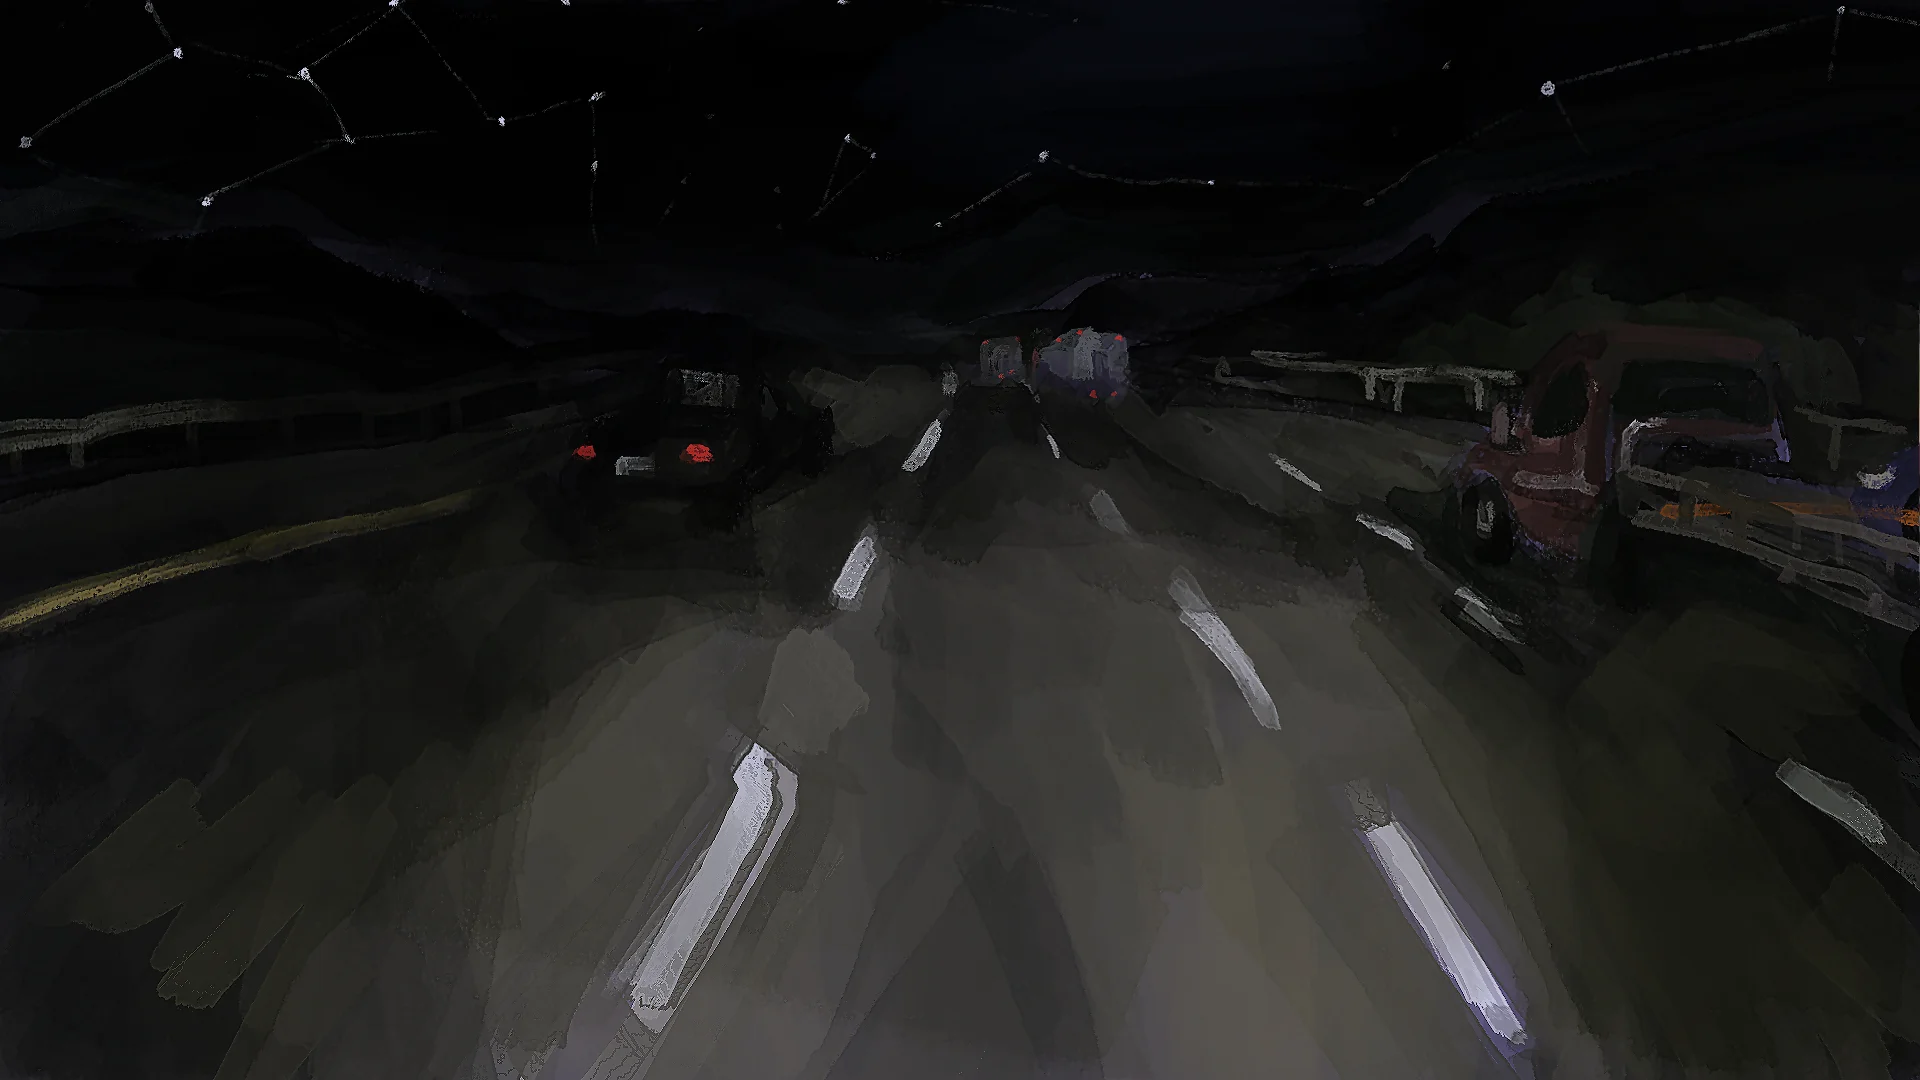 A painting of I-15 at night. There is a rollback truck towing a blue sedan in the rightmost lane, and the constellation Hercules is mostly visible in the sky.